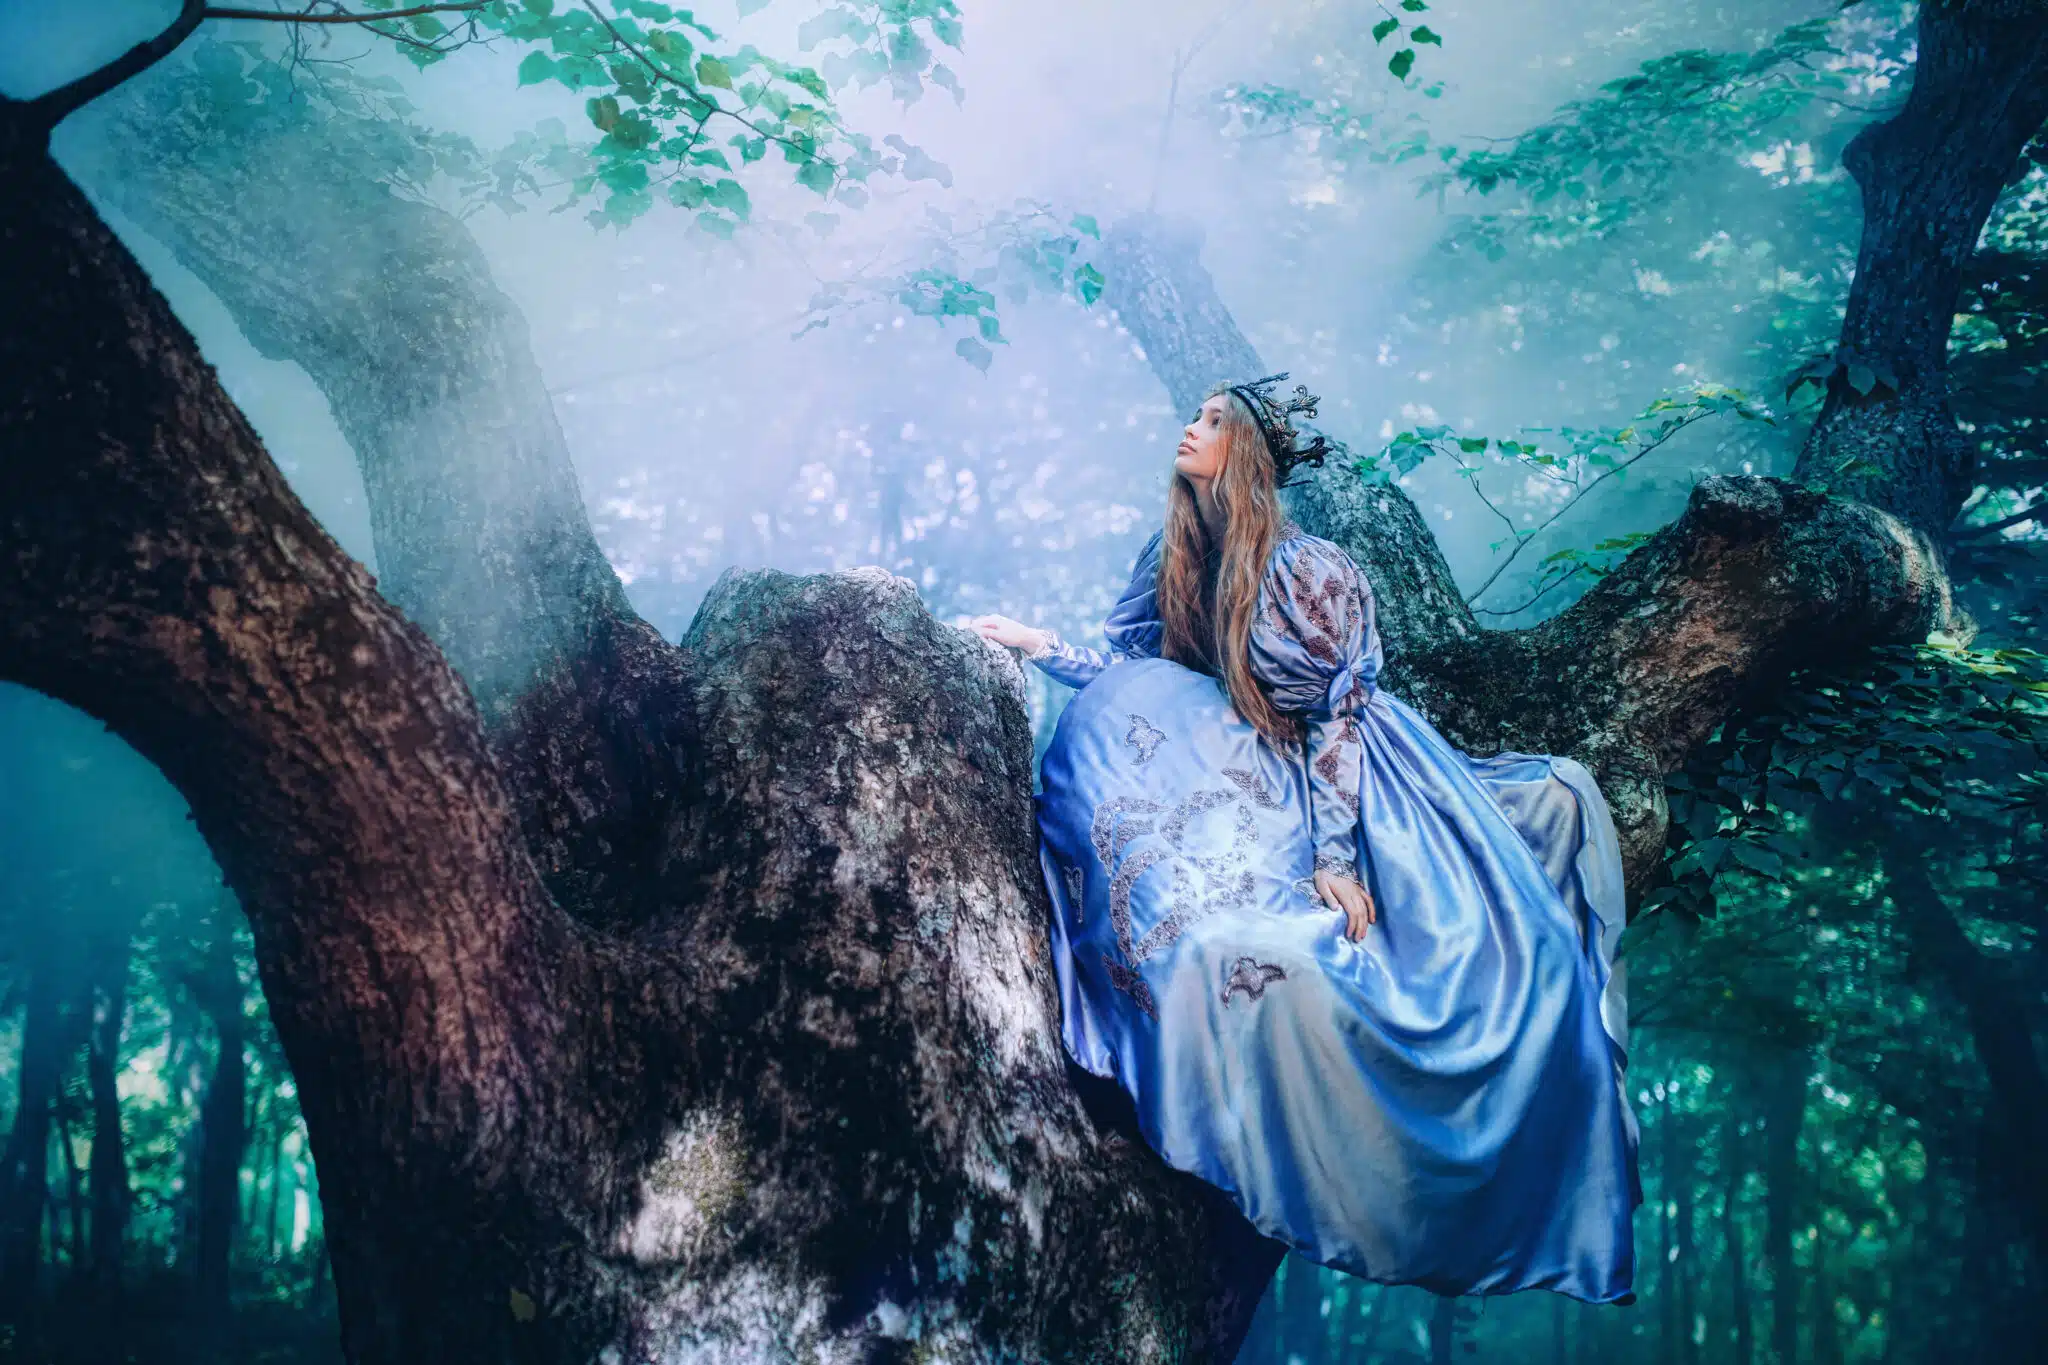 Princess in a magic forest